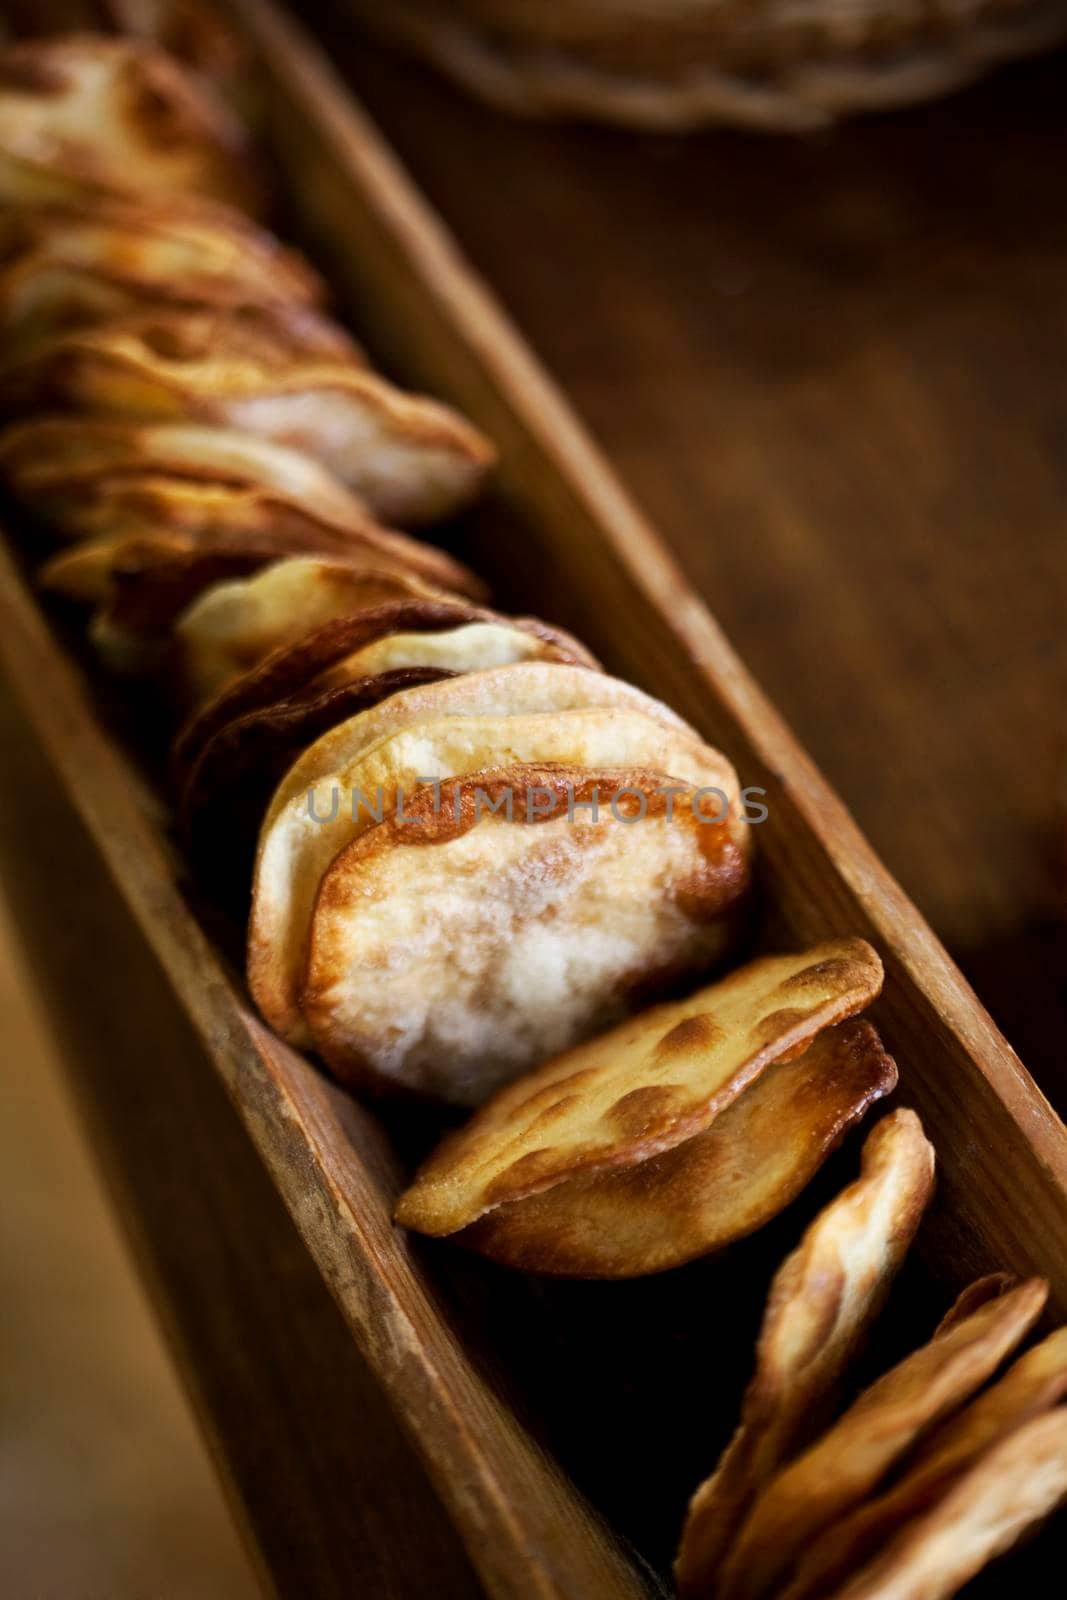 Small crispy cakes in a wooden box